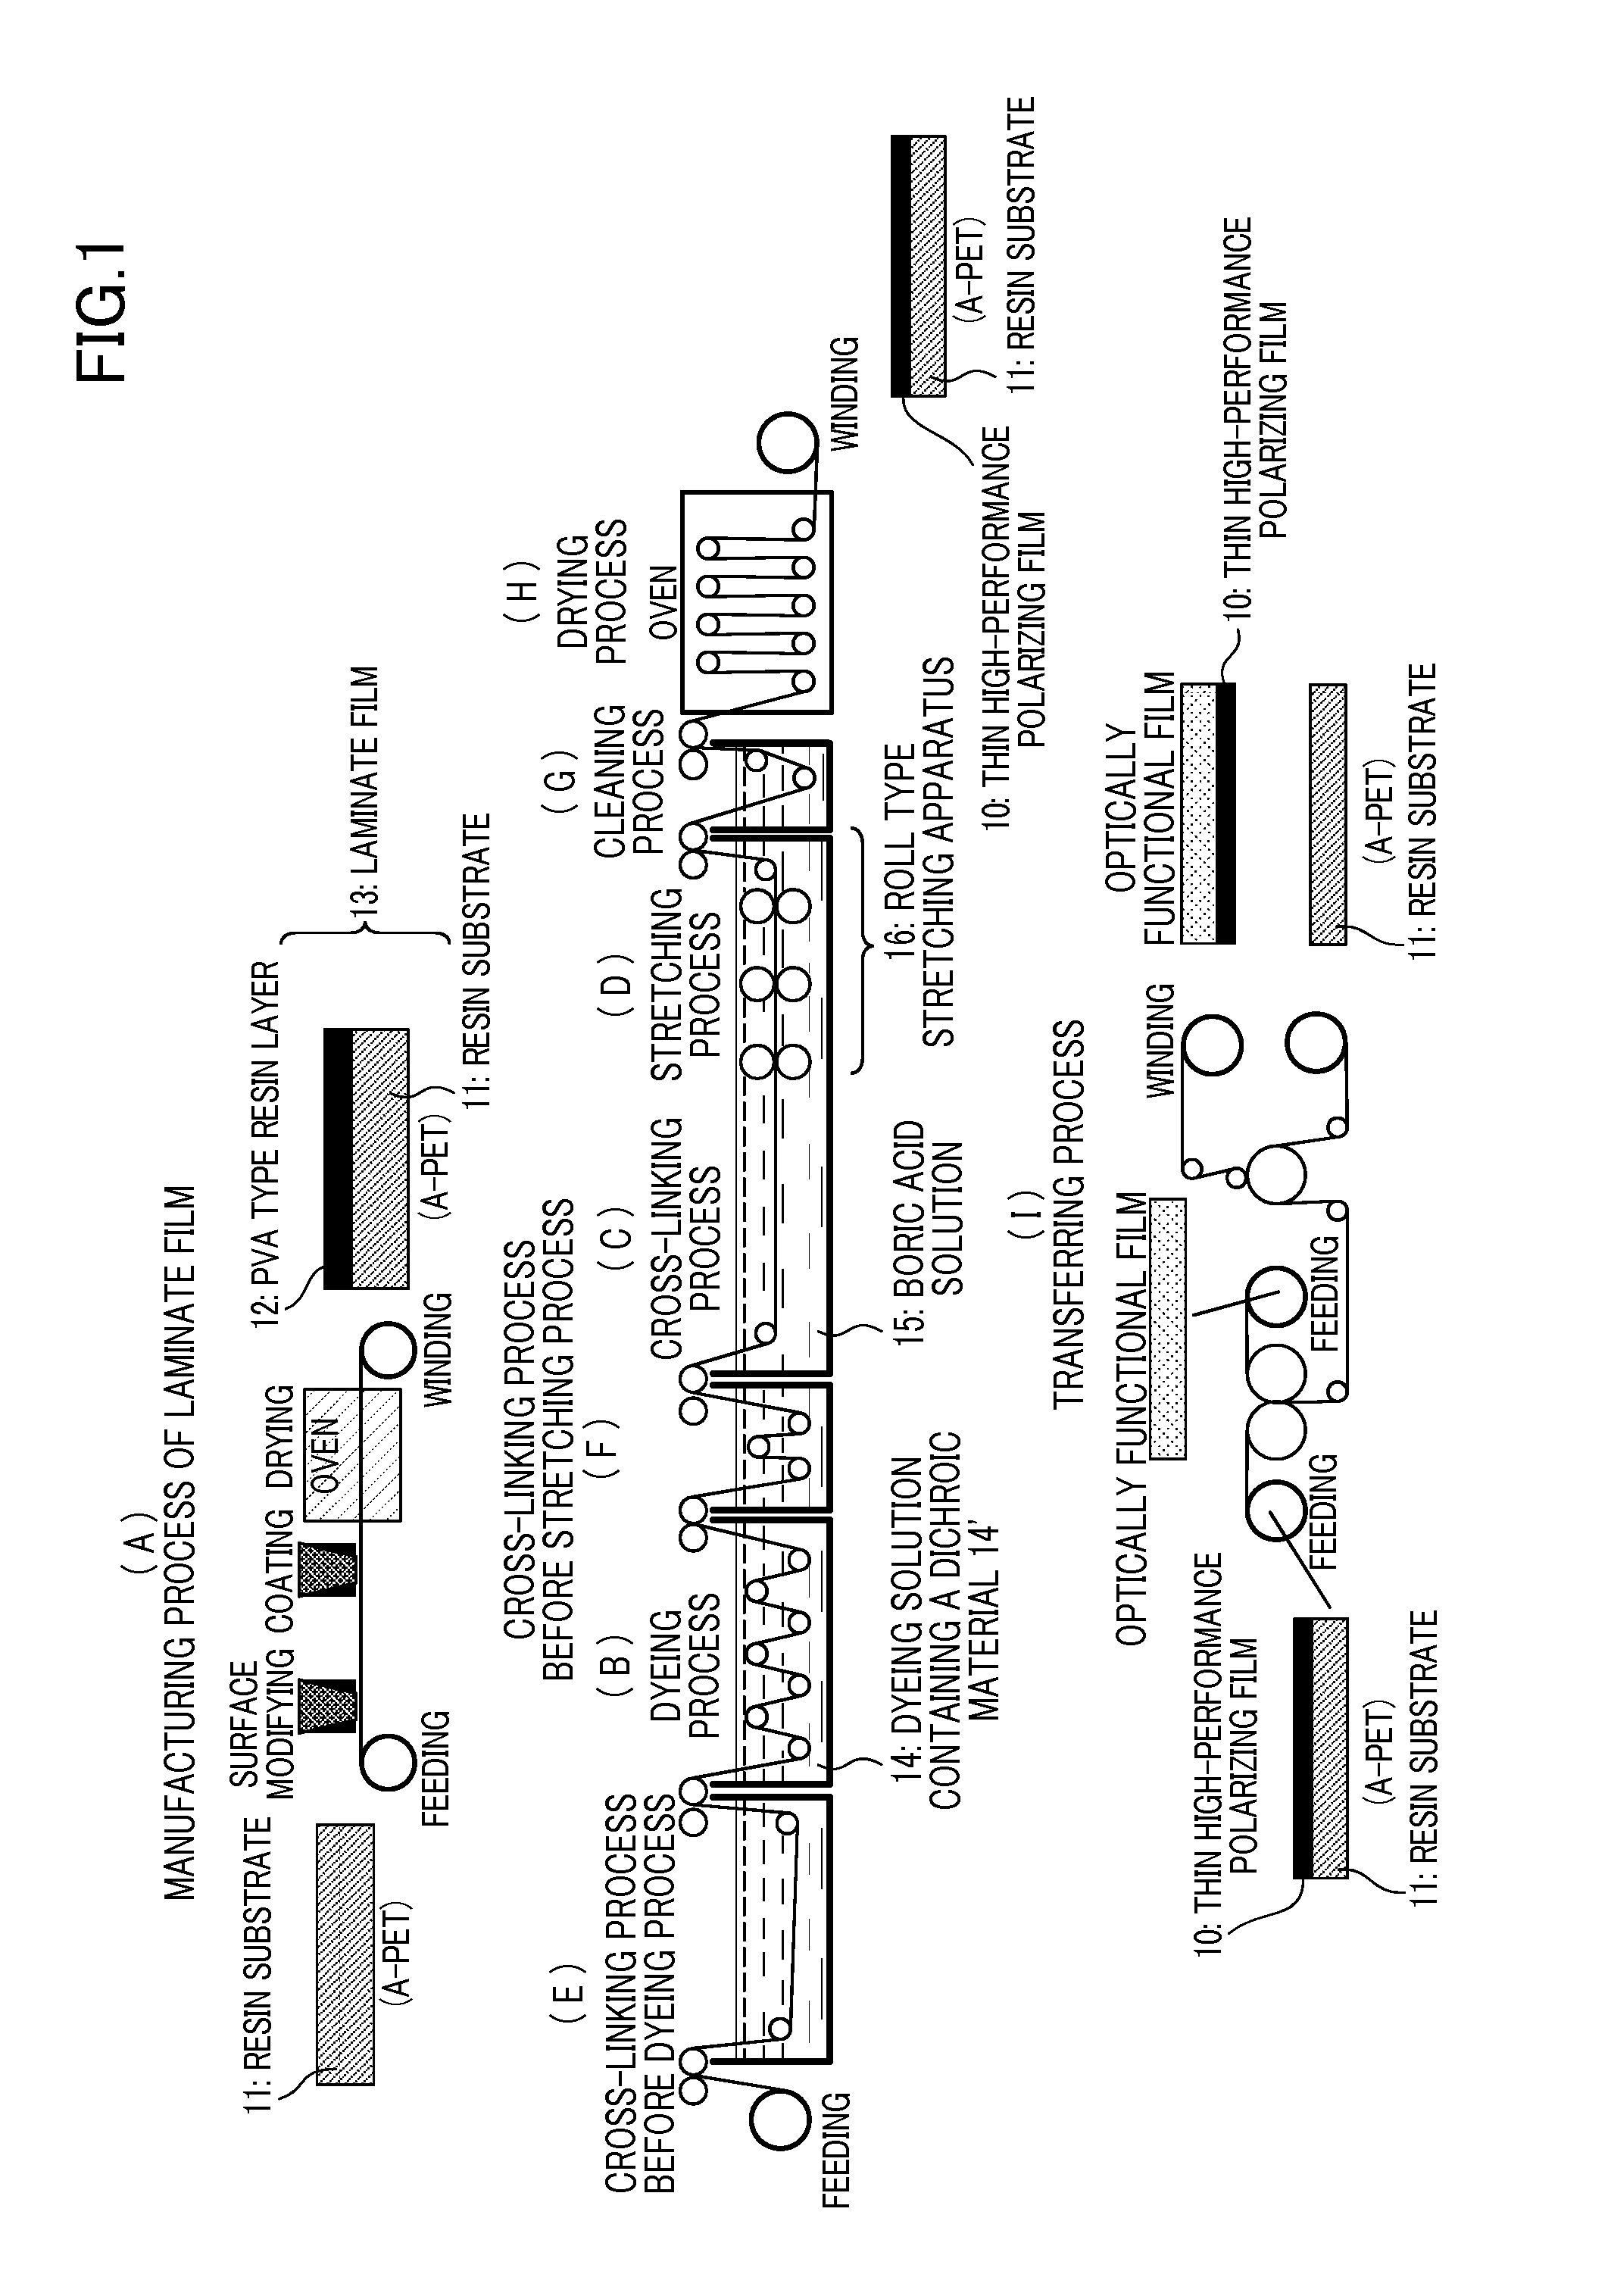 Thin high-performance polarizing film and method for manufacturing the same